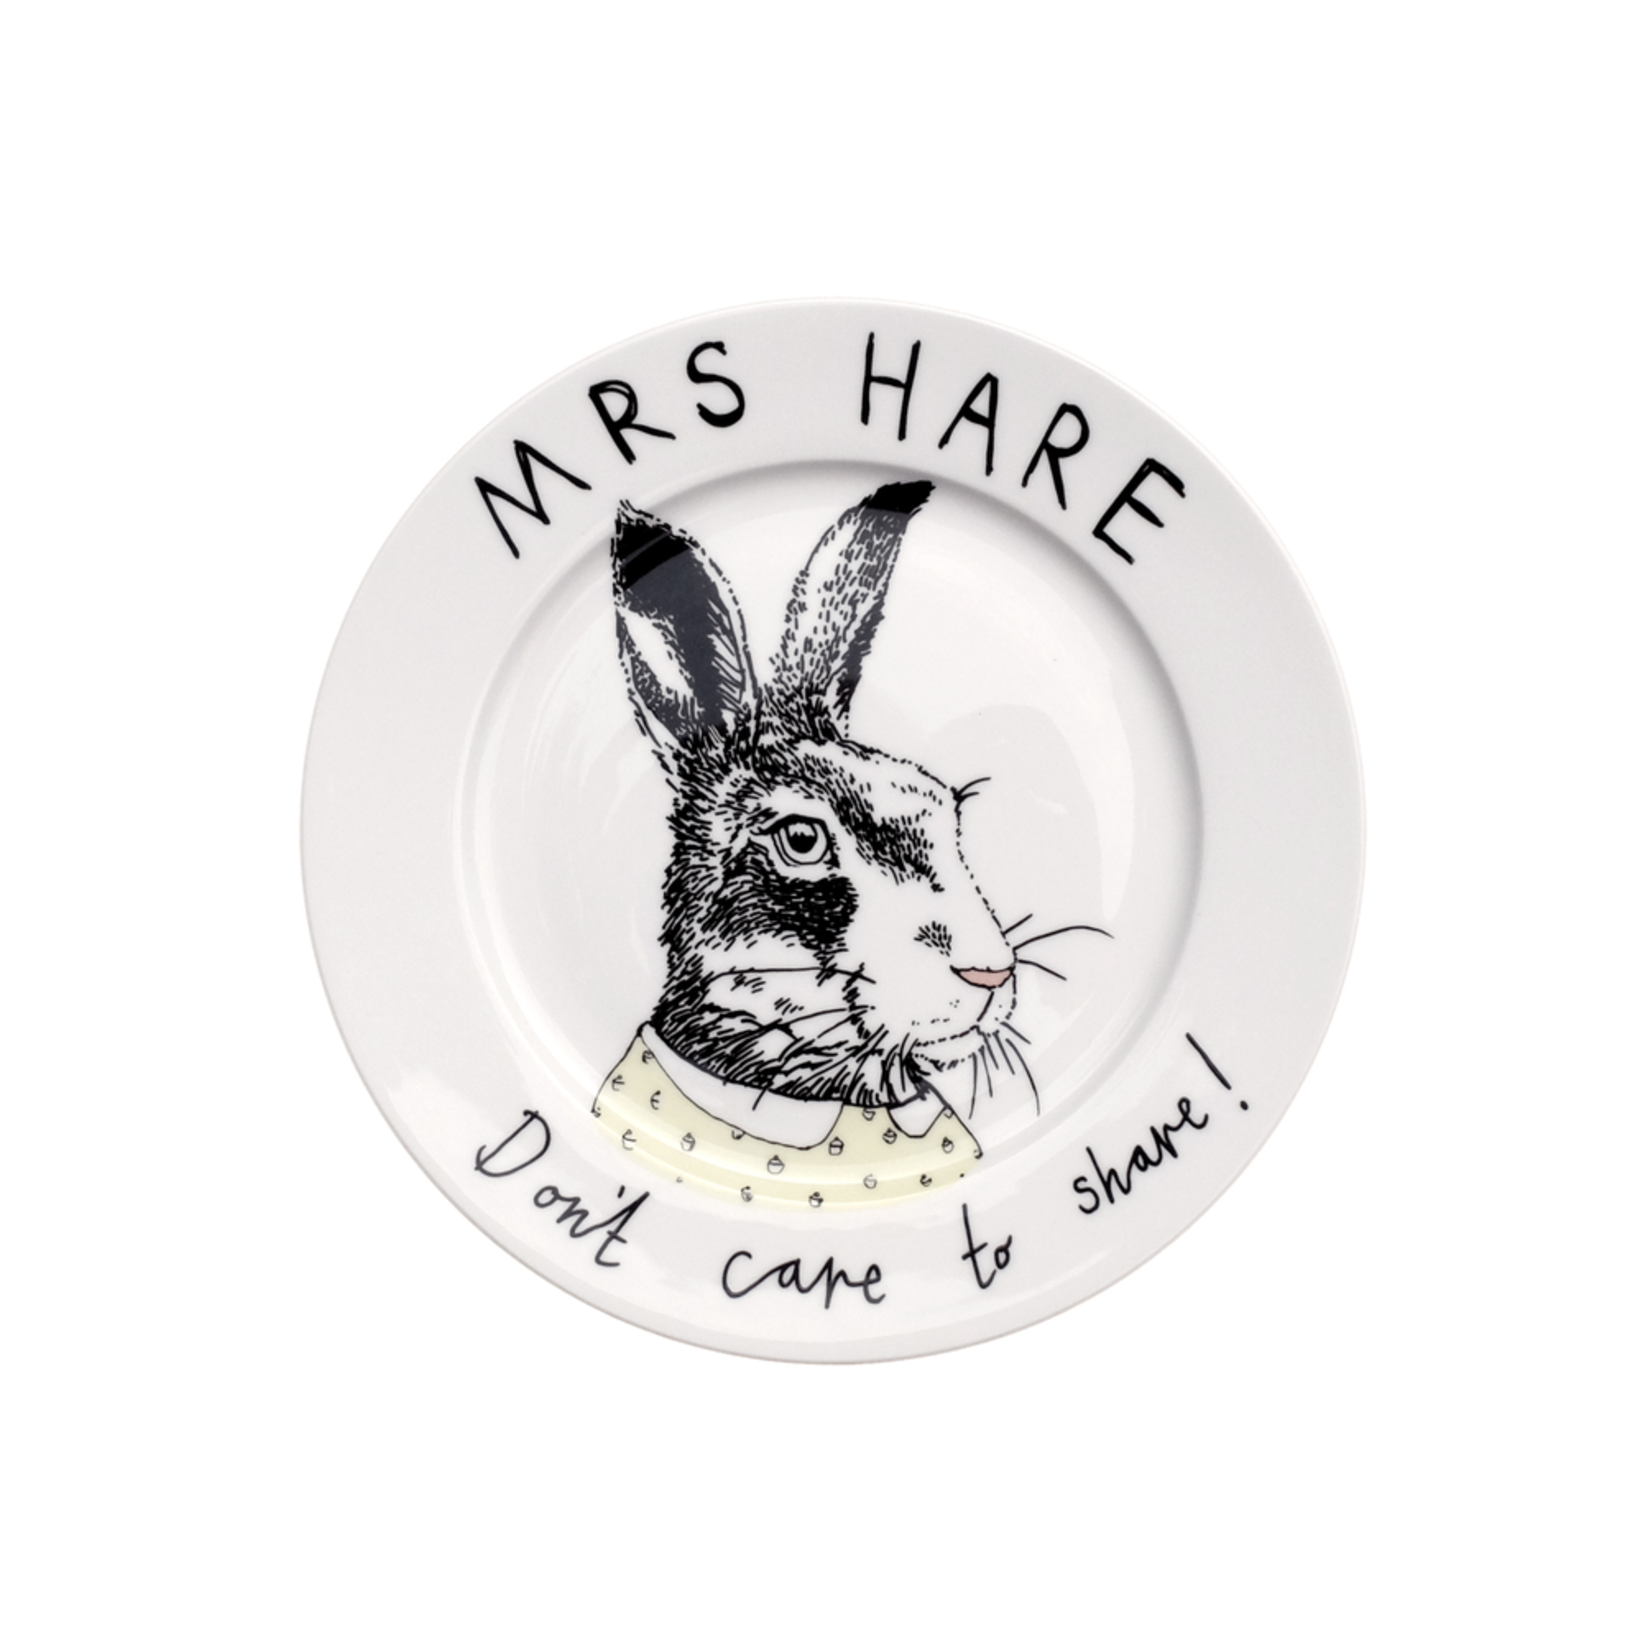 Dinnerware Mrs Hare Don't Care To Share Plate